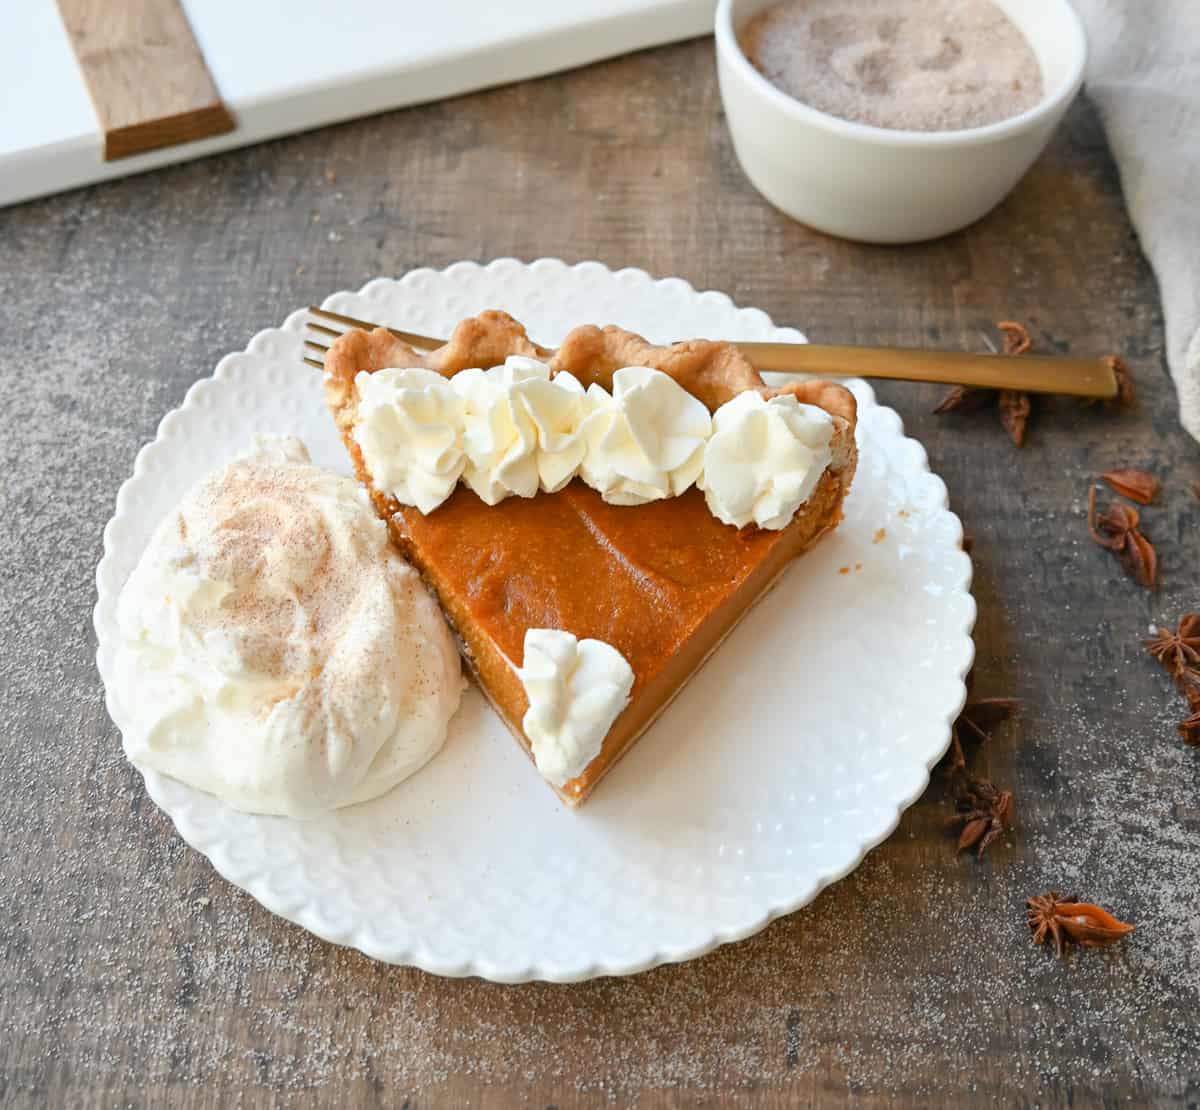 This Southern Sweet Potato Pie has the creamiest, spiced brown sugar sweet potato filling in a buttery crust and topped with fresh whipped cream. This is the perfect Fall and Thanksgiving dessert.